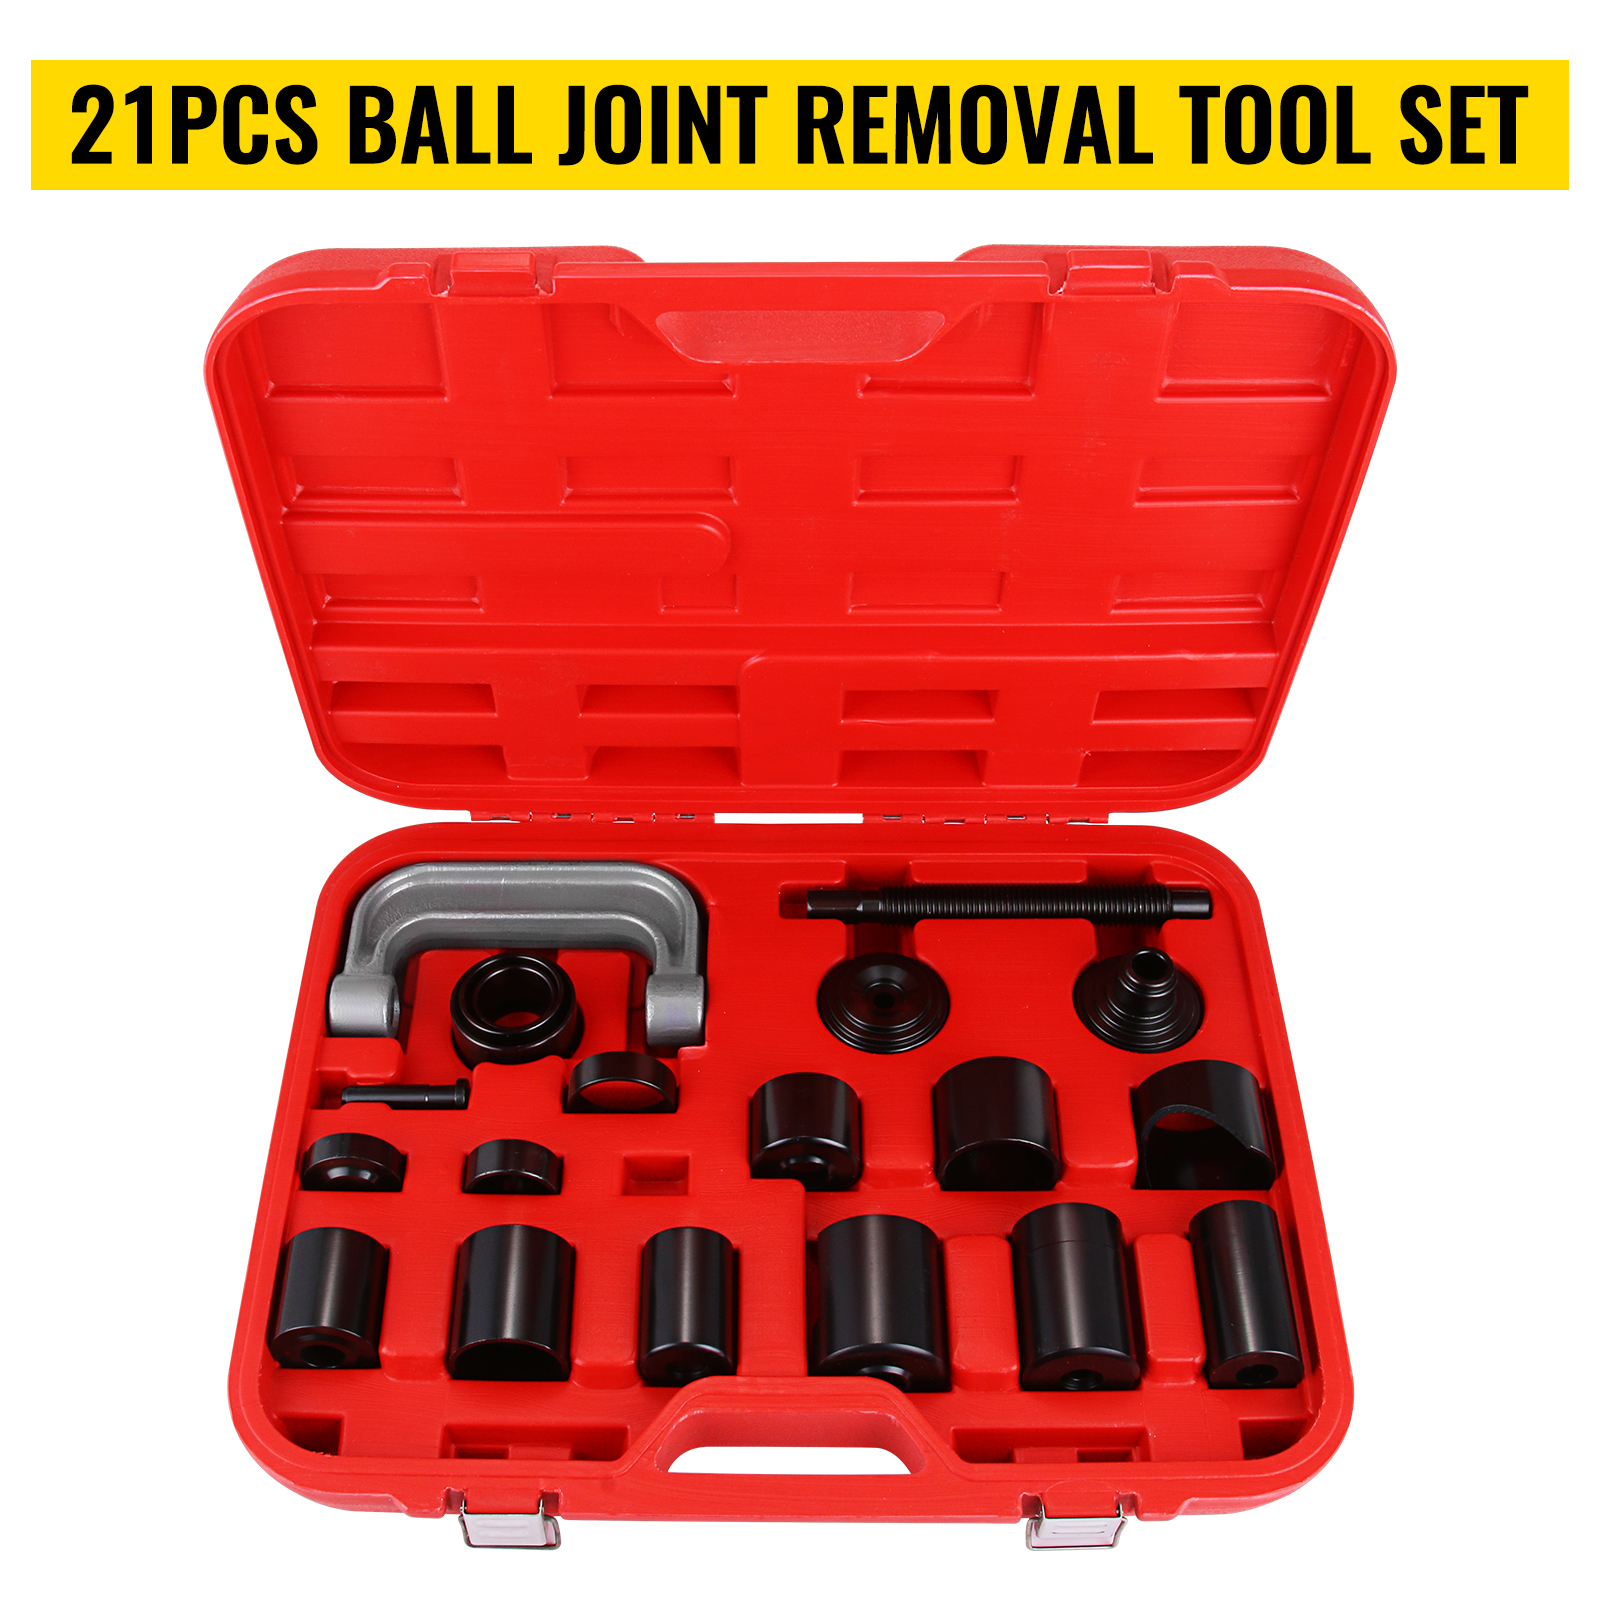 labwork 21Pcs Auto Ball Joint Press U Repair Removal Tool Installing Master Adapter Universal Master Ball Joint Press U-Joint Puller Removal Service Adapter Fit for 2WD and 4-Wheel Drive Car Blue 